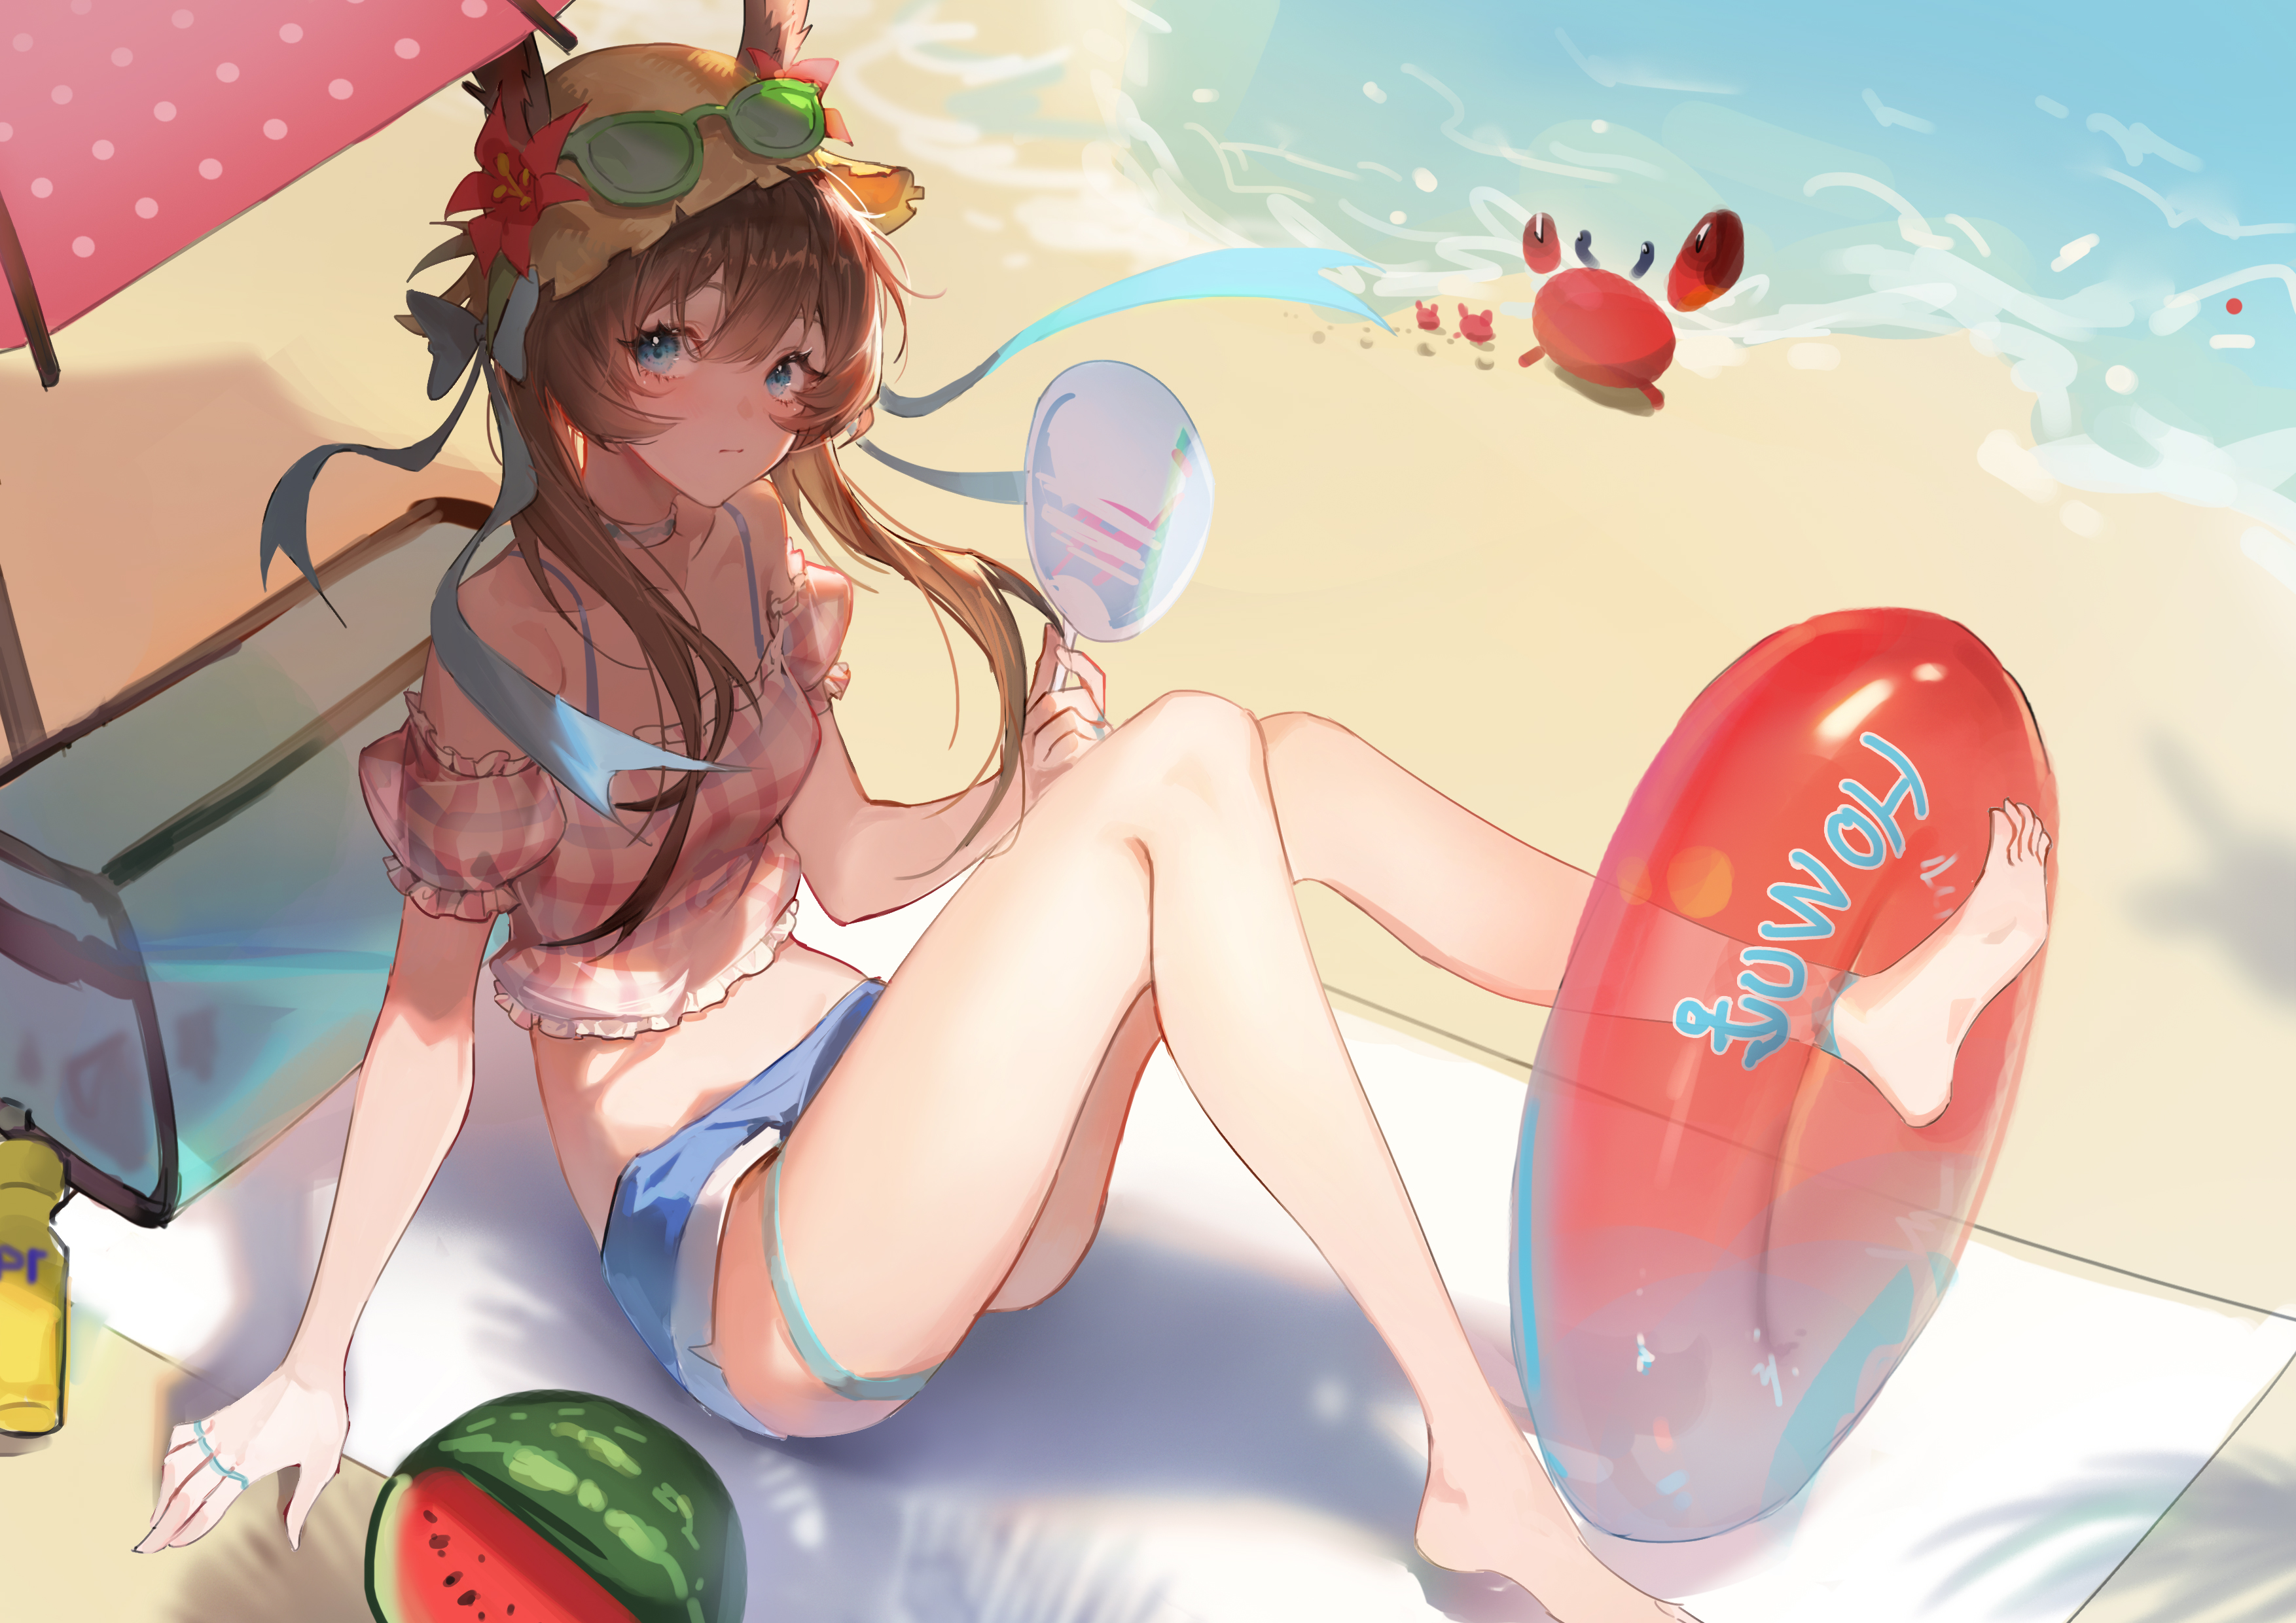 Anime 3508x2480 anime anime girls Arknights Amiya (Arknights) beach bunny girl brunette blue eyes short shorts watermelons crabs floater water sunglasses straw hat